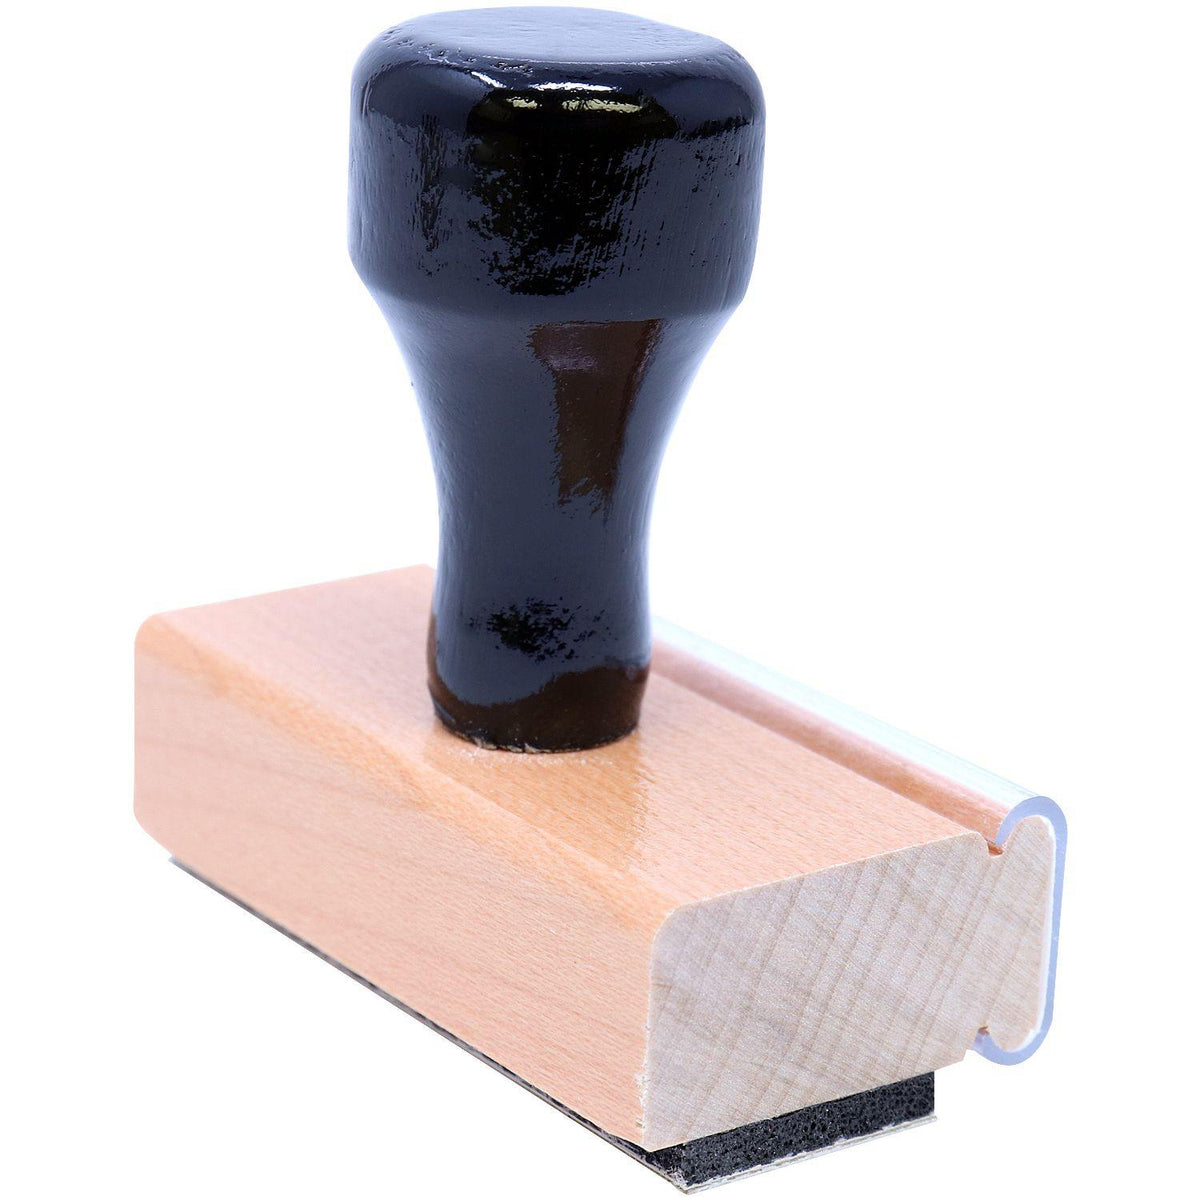 Large WOW Rubber Stamp - Engineer Seal Stamps - Brand_Acorn, Impression Size_Large, Stamp Type_Regular Stamp, Type of Use_Teacher